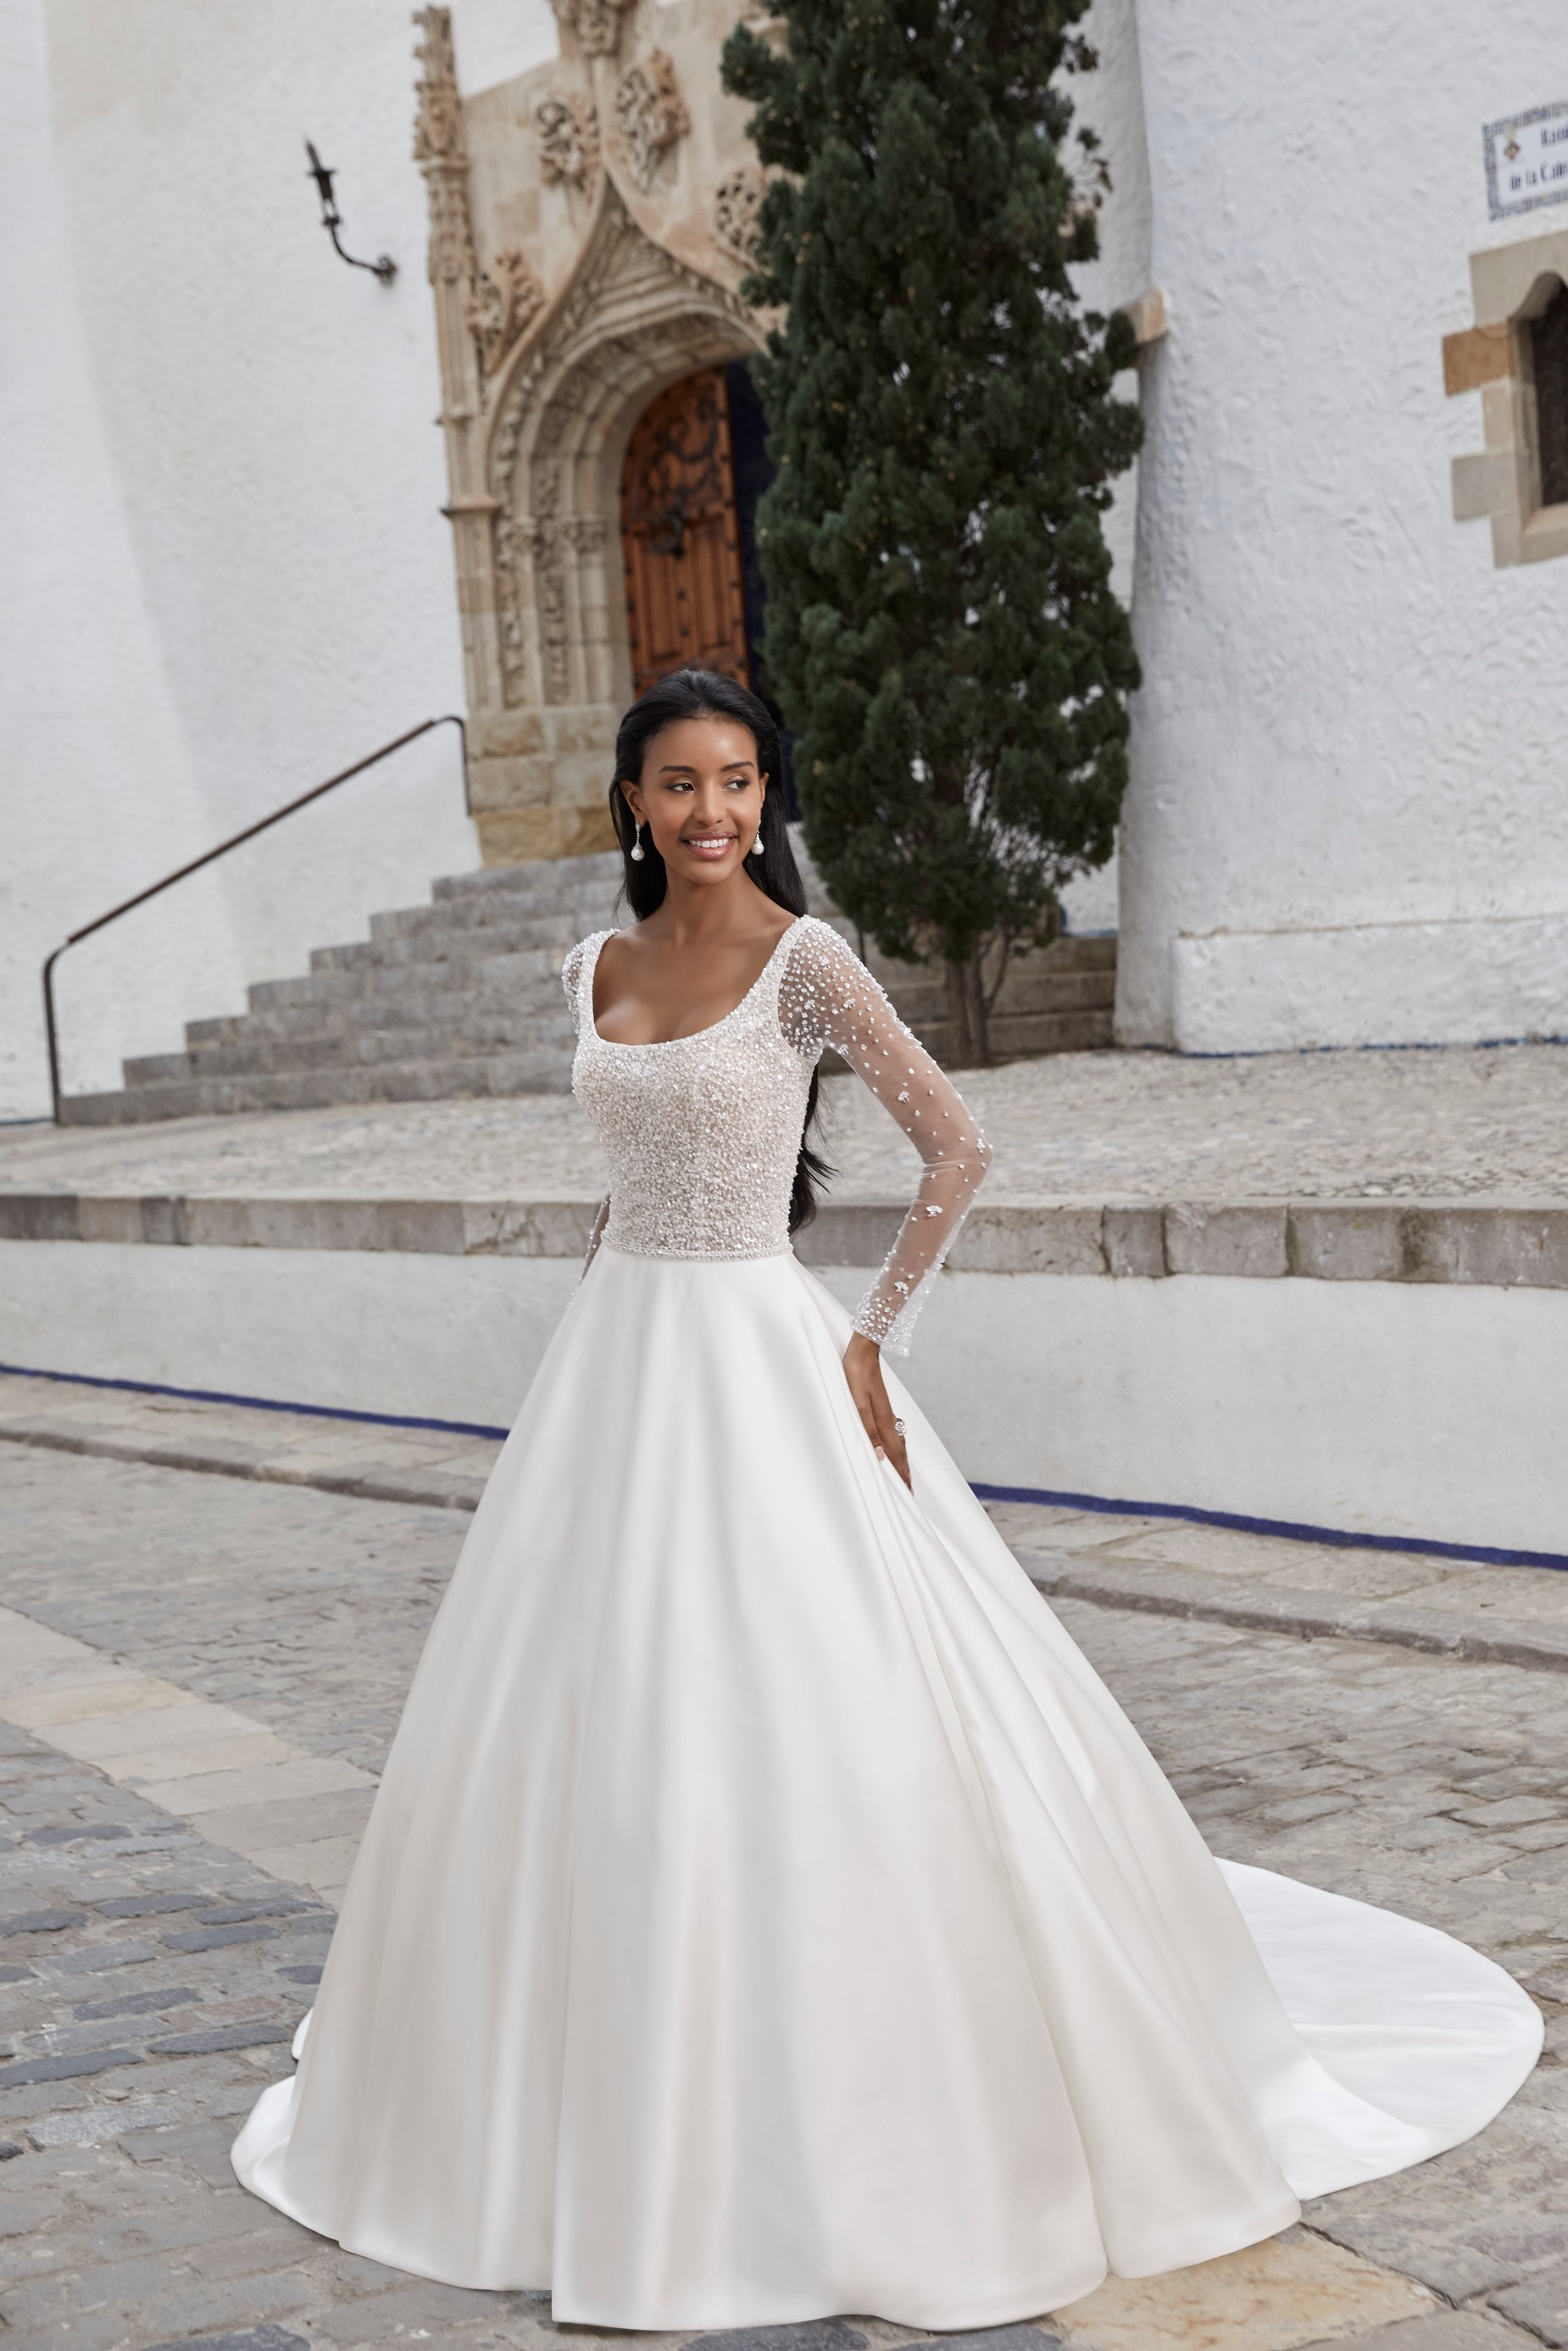 Woman standing in front of scenic church and tree wearing princess ball gown wedding dress with beaded bodice and long sleeves